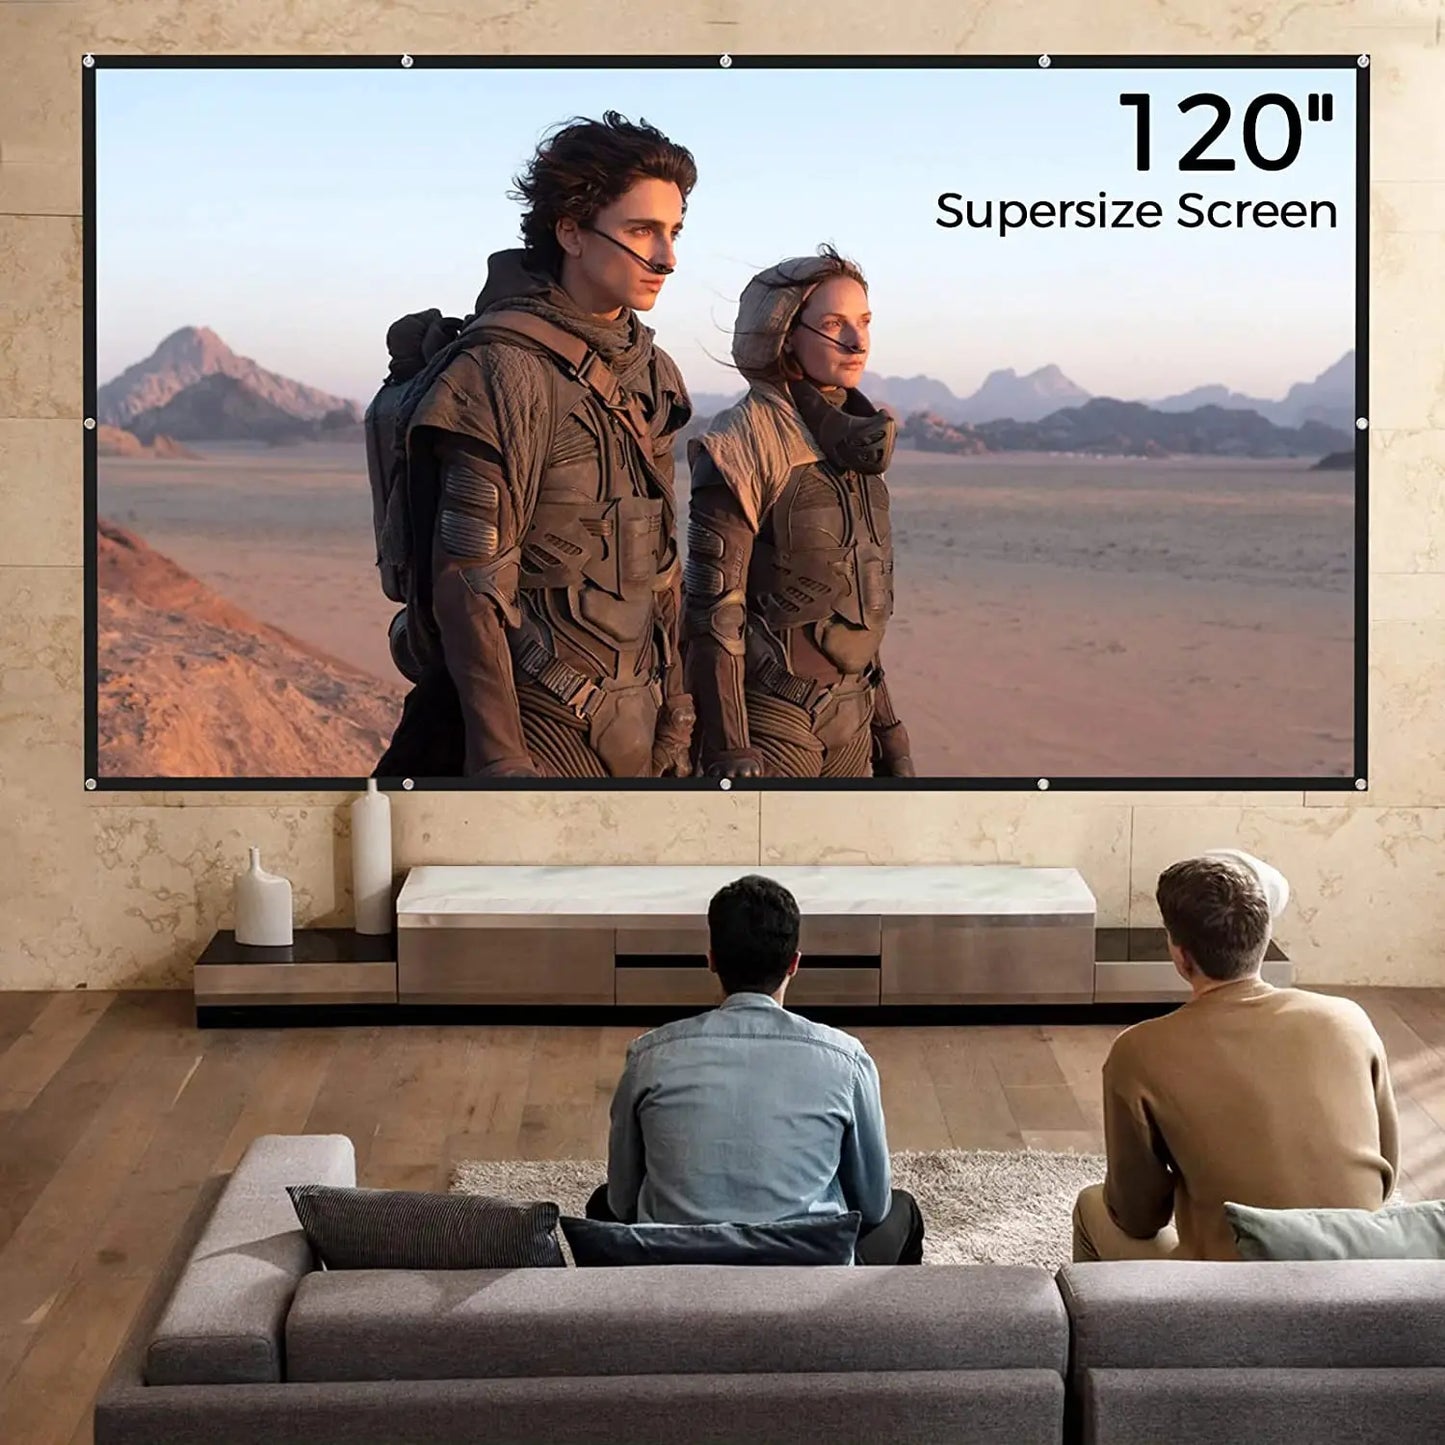 New Year Sale - Projector Screen 120 inch, FUDONI Outdoor Movie Screen 16:9 Foldable Washable Anti-Crease, Portable Projector Screen Outdoor Indoor Double Sided Projection Screen for Home Theater Camping Party Office FUDONI